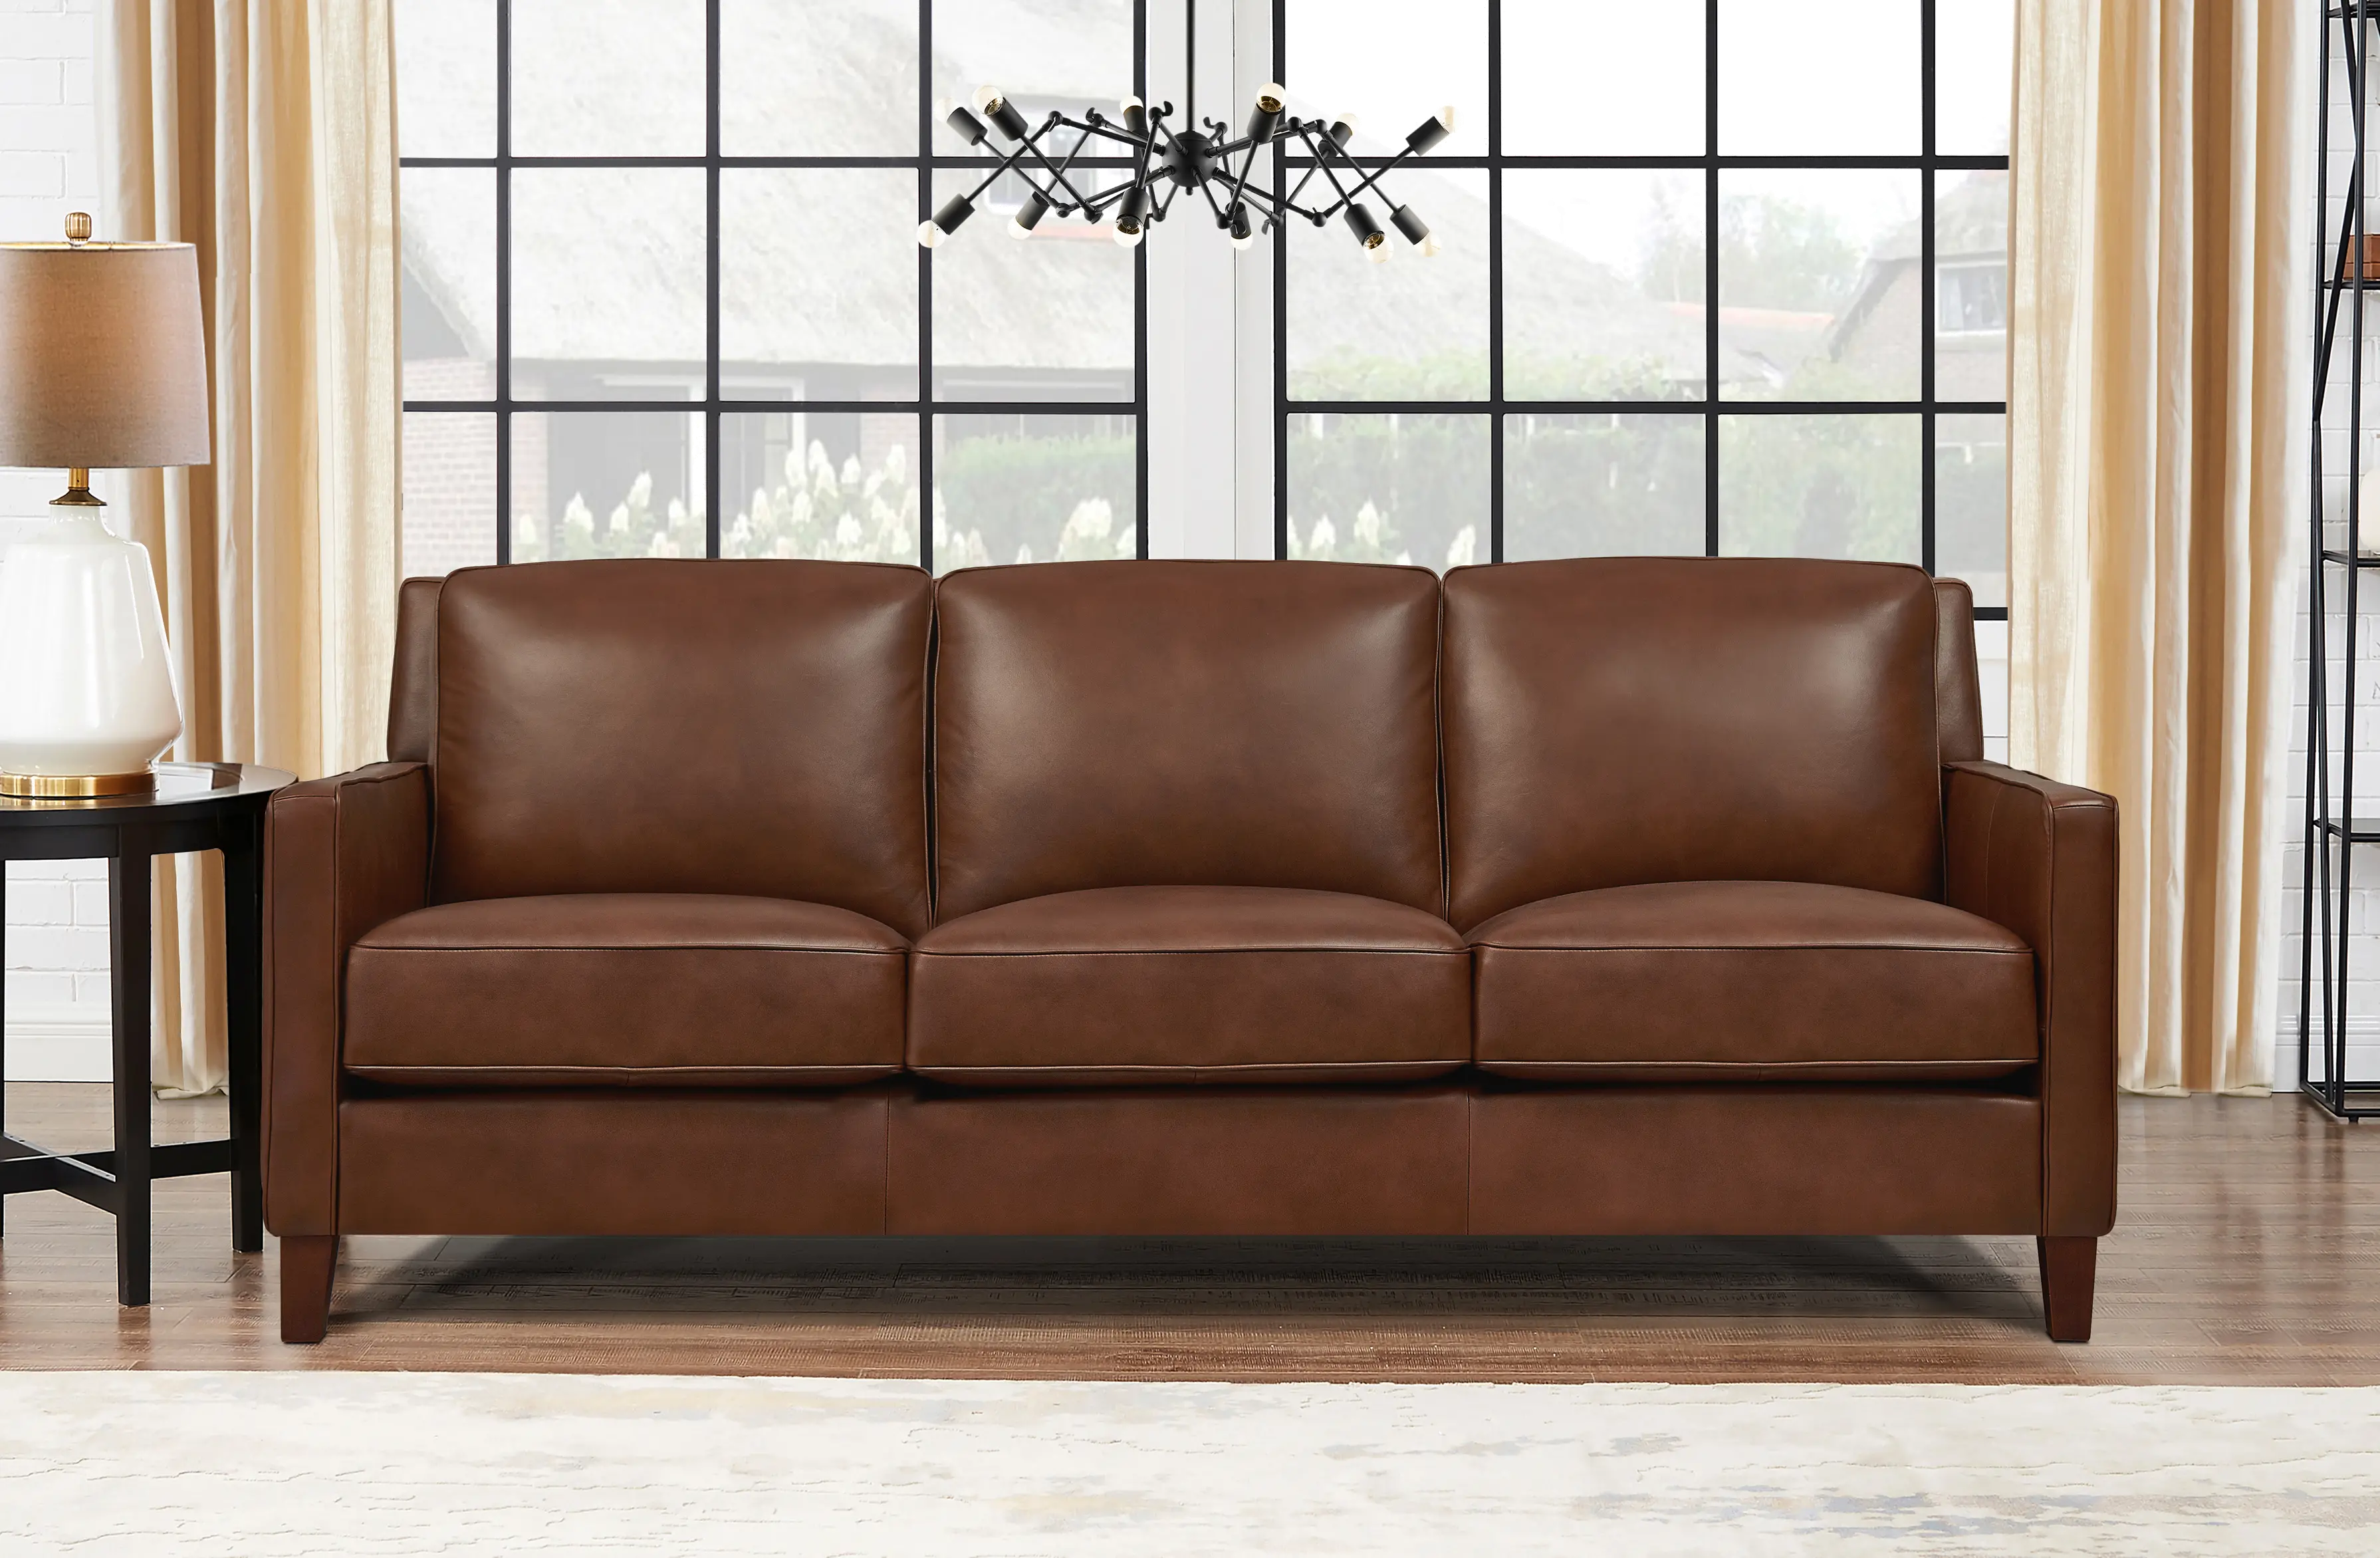 New Haven Brown Leather Sofa - Amax Leather